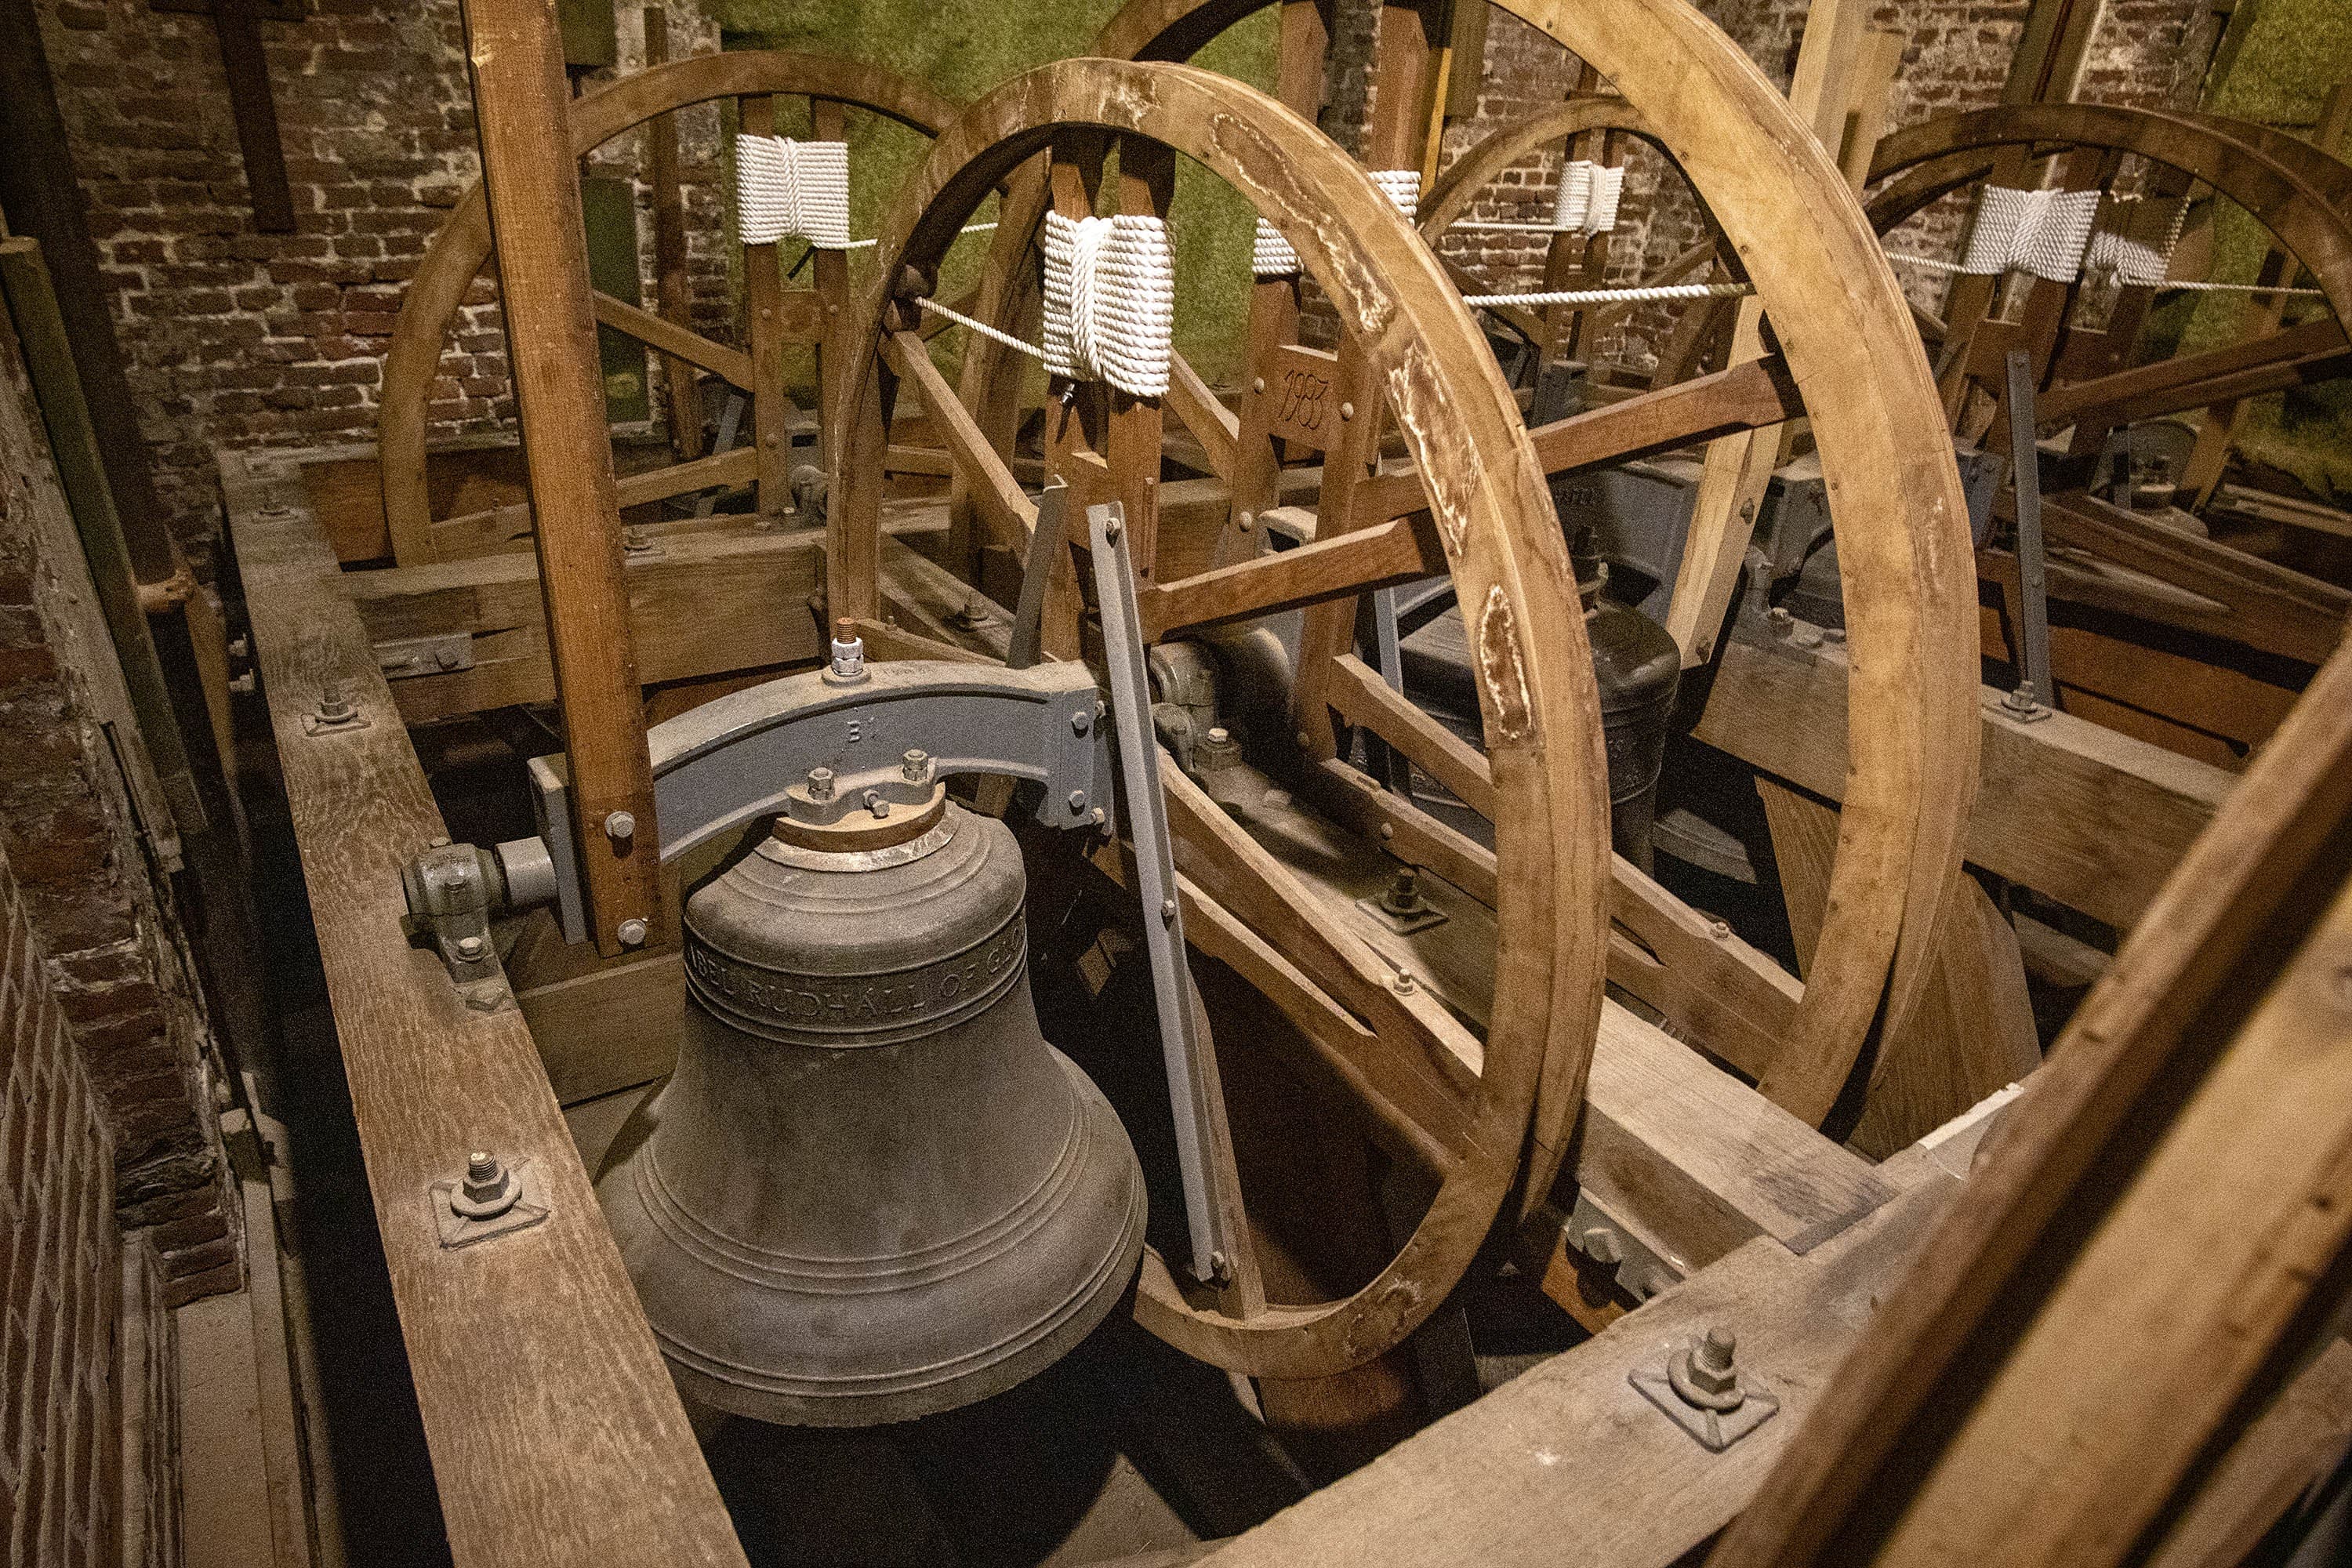 Ring of bells - Wikipedia